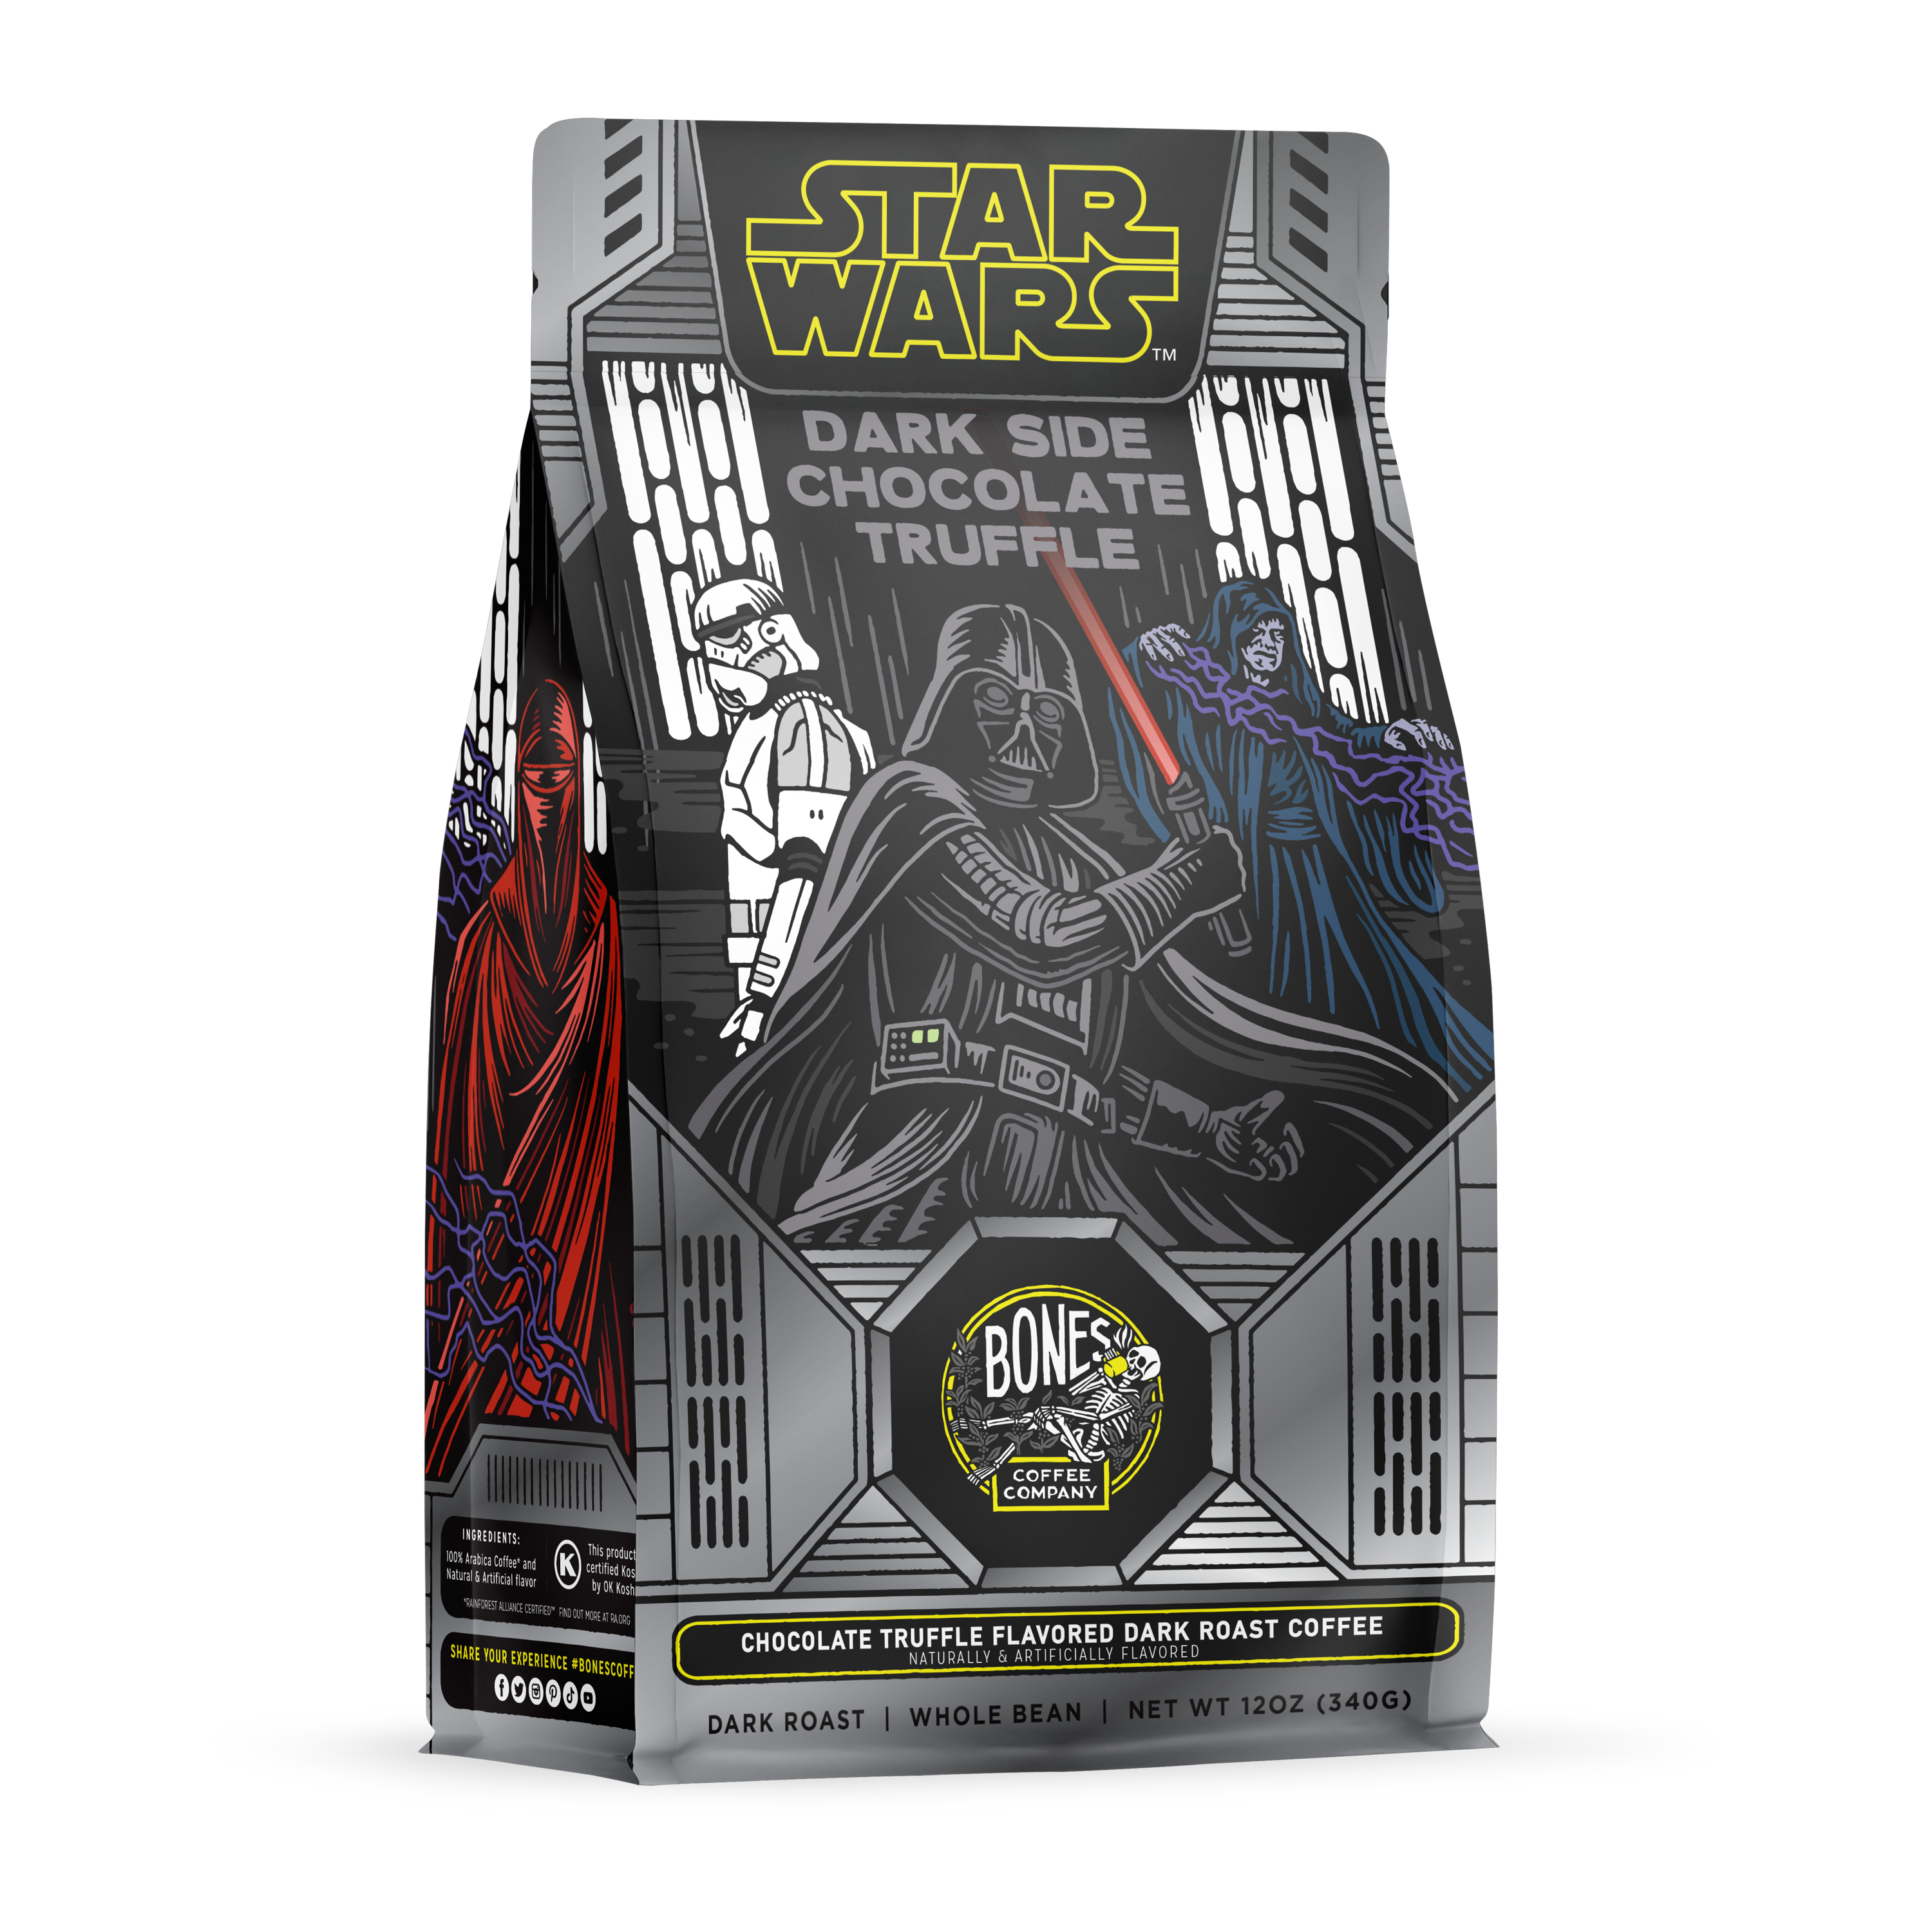 The front of a 12 ounce bag of Bones Coffee Company Dark Side Chocolate Truffle flavored coffee. Its flavor is chocolate truffle, and its art shows Darth Vader, Emperor Palpatine, and a Stormtrooper on it.